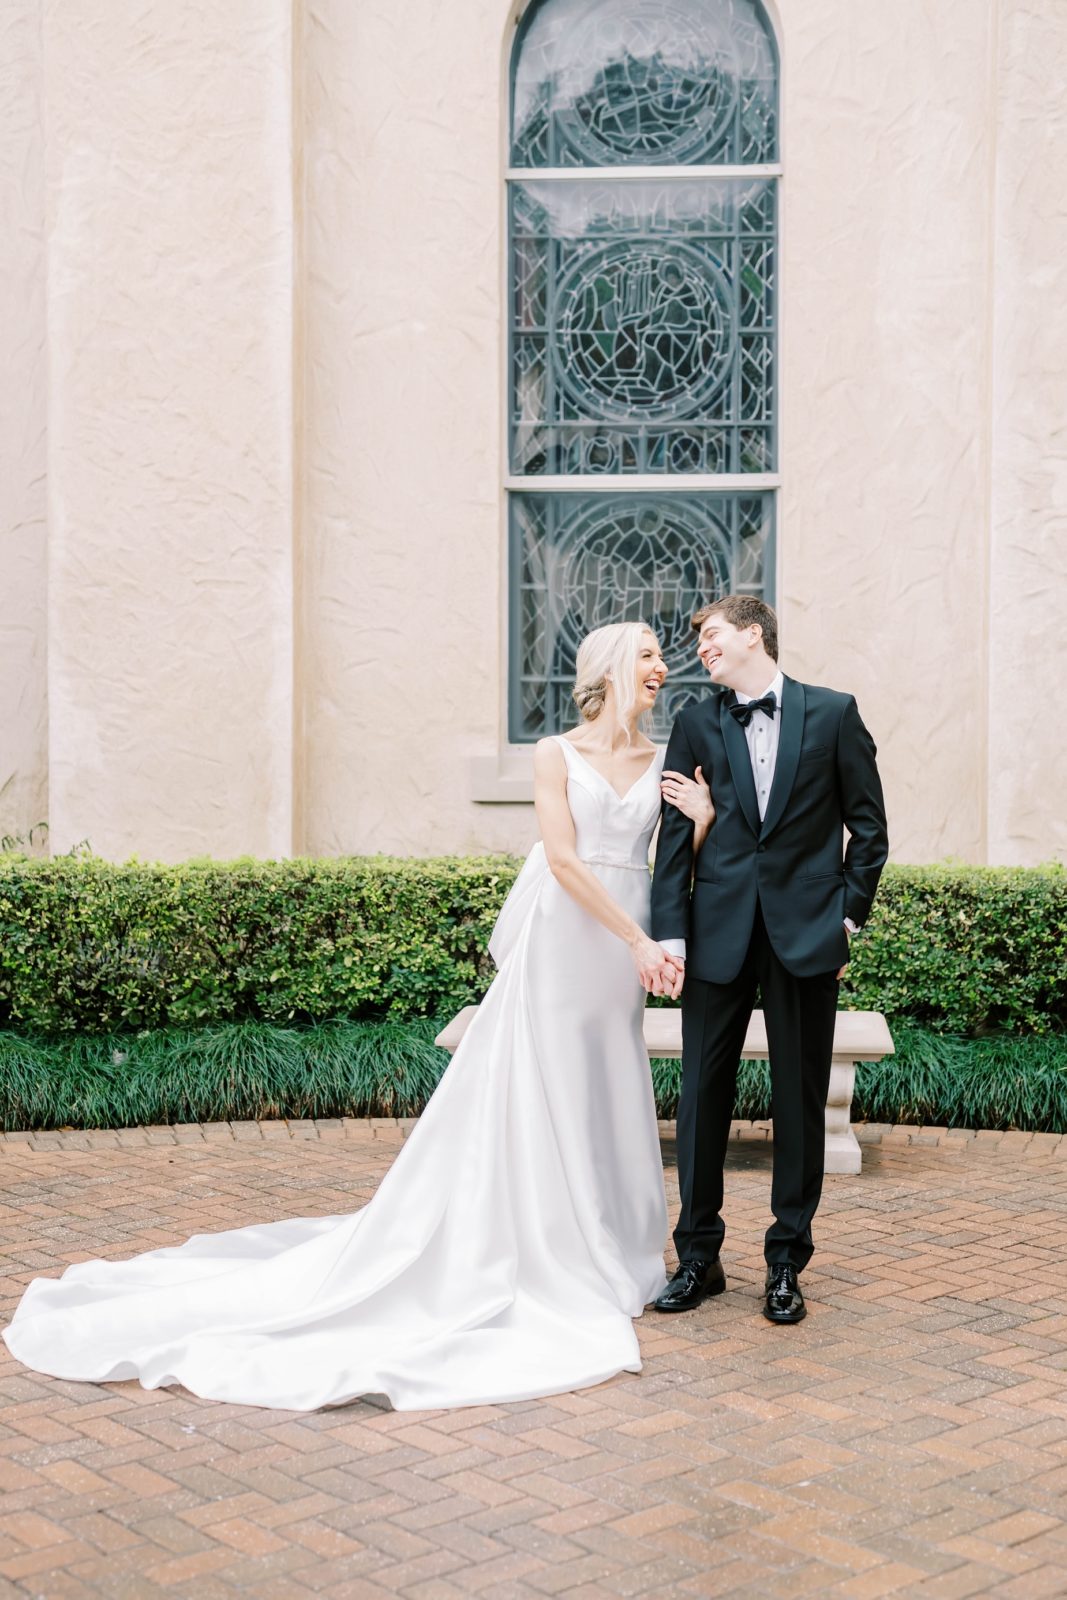 The bride and groom look at one another and laugh outside the glass window by Christina Elliott Photography. laughing newlyweds #christinaelliottphotography #Houstonweddings #catholicchurchweddings #navyblue #sayIdo #Houstonweddingphotographers